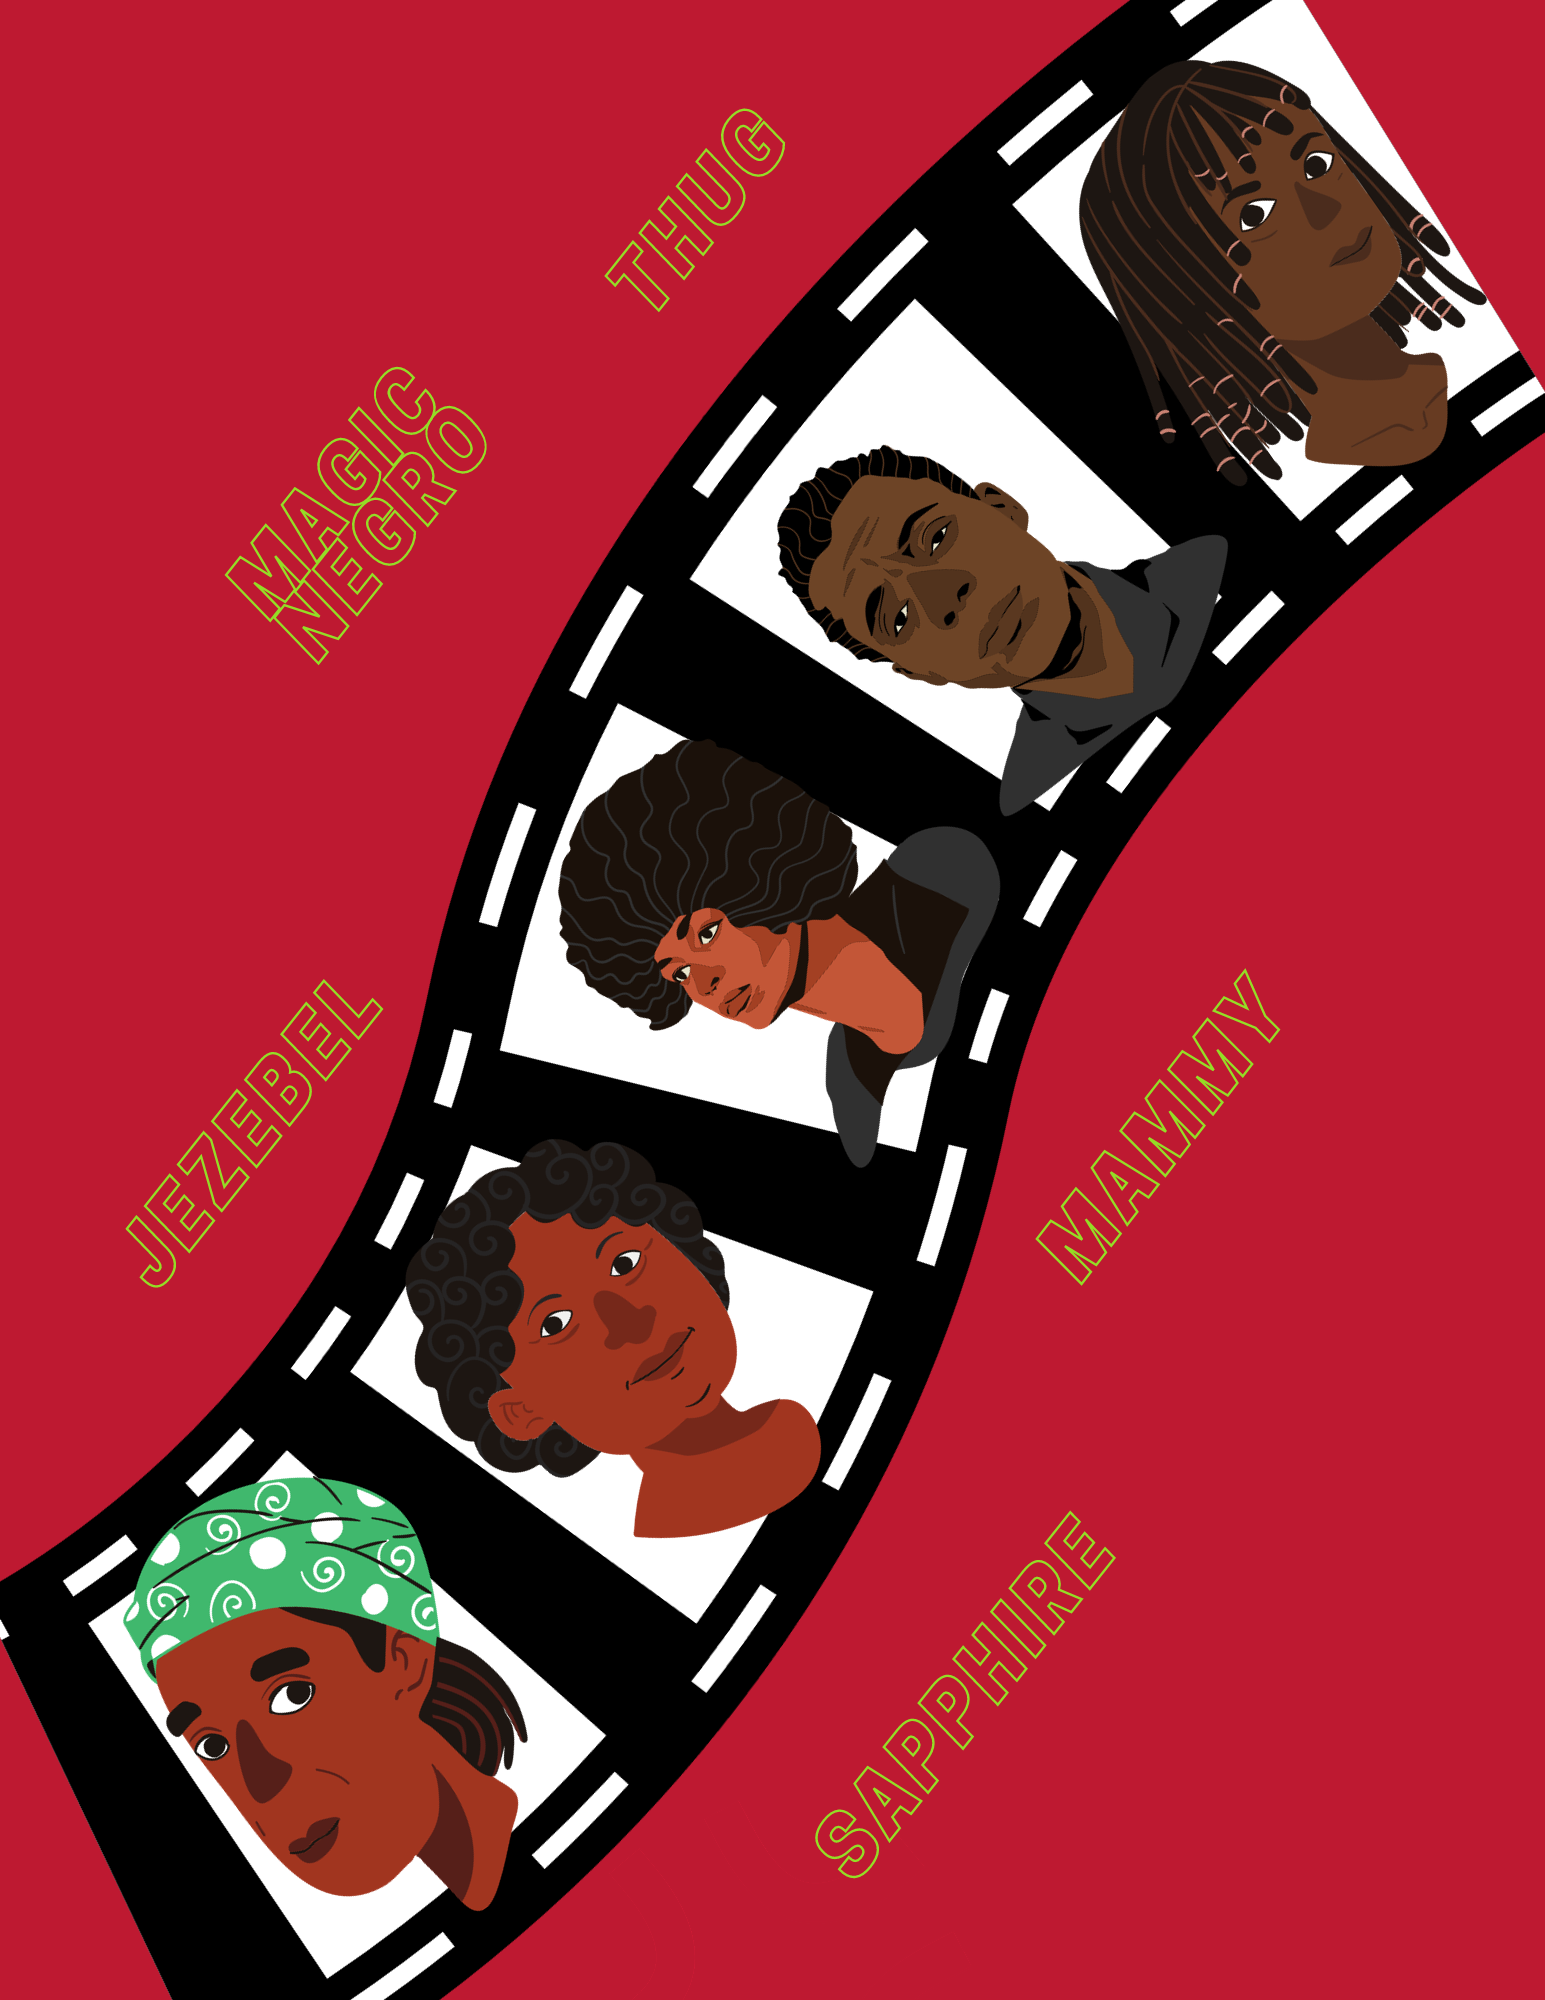 As time goes on, Black people become primary characters instead of background characters. The more representation you get the more complex your representation can be. 
(Made by Faith Wallace on Canva)